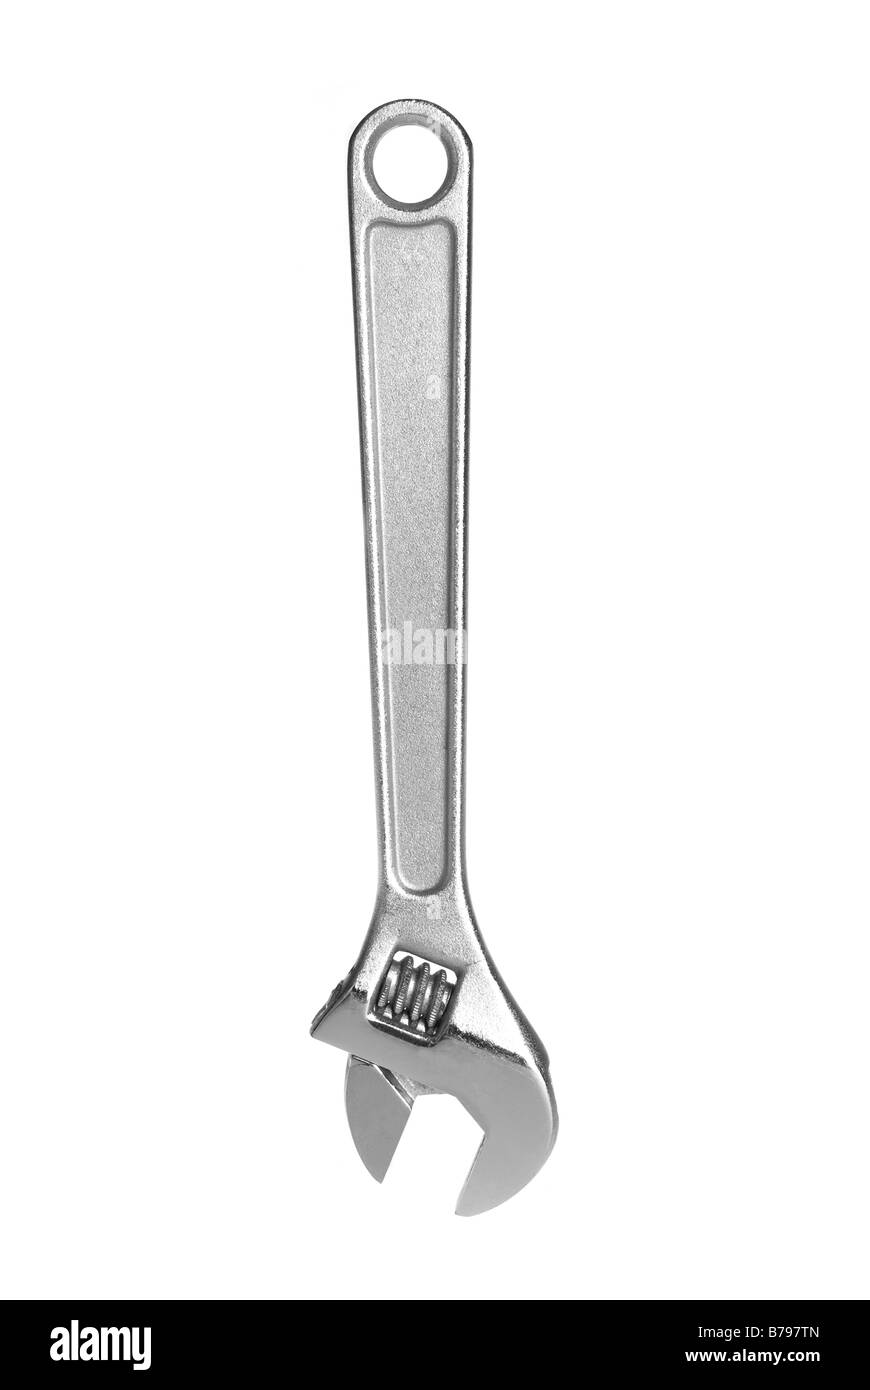 An adjustable wrench isolated on a white background Stock Photo